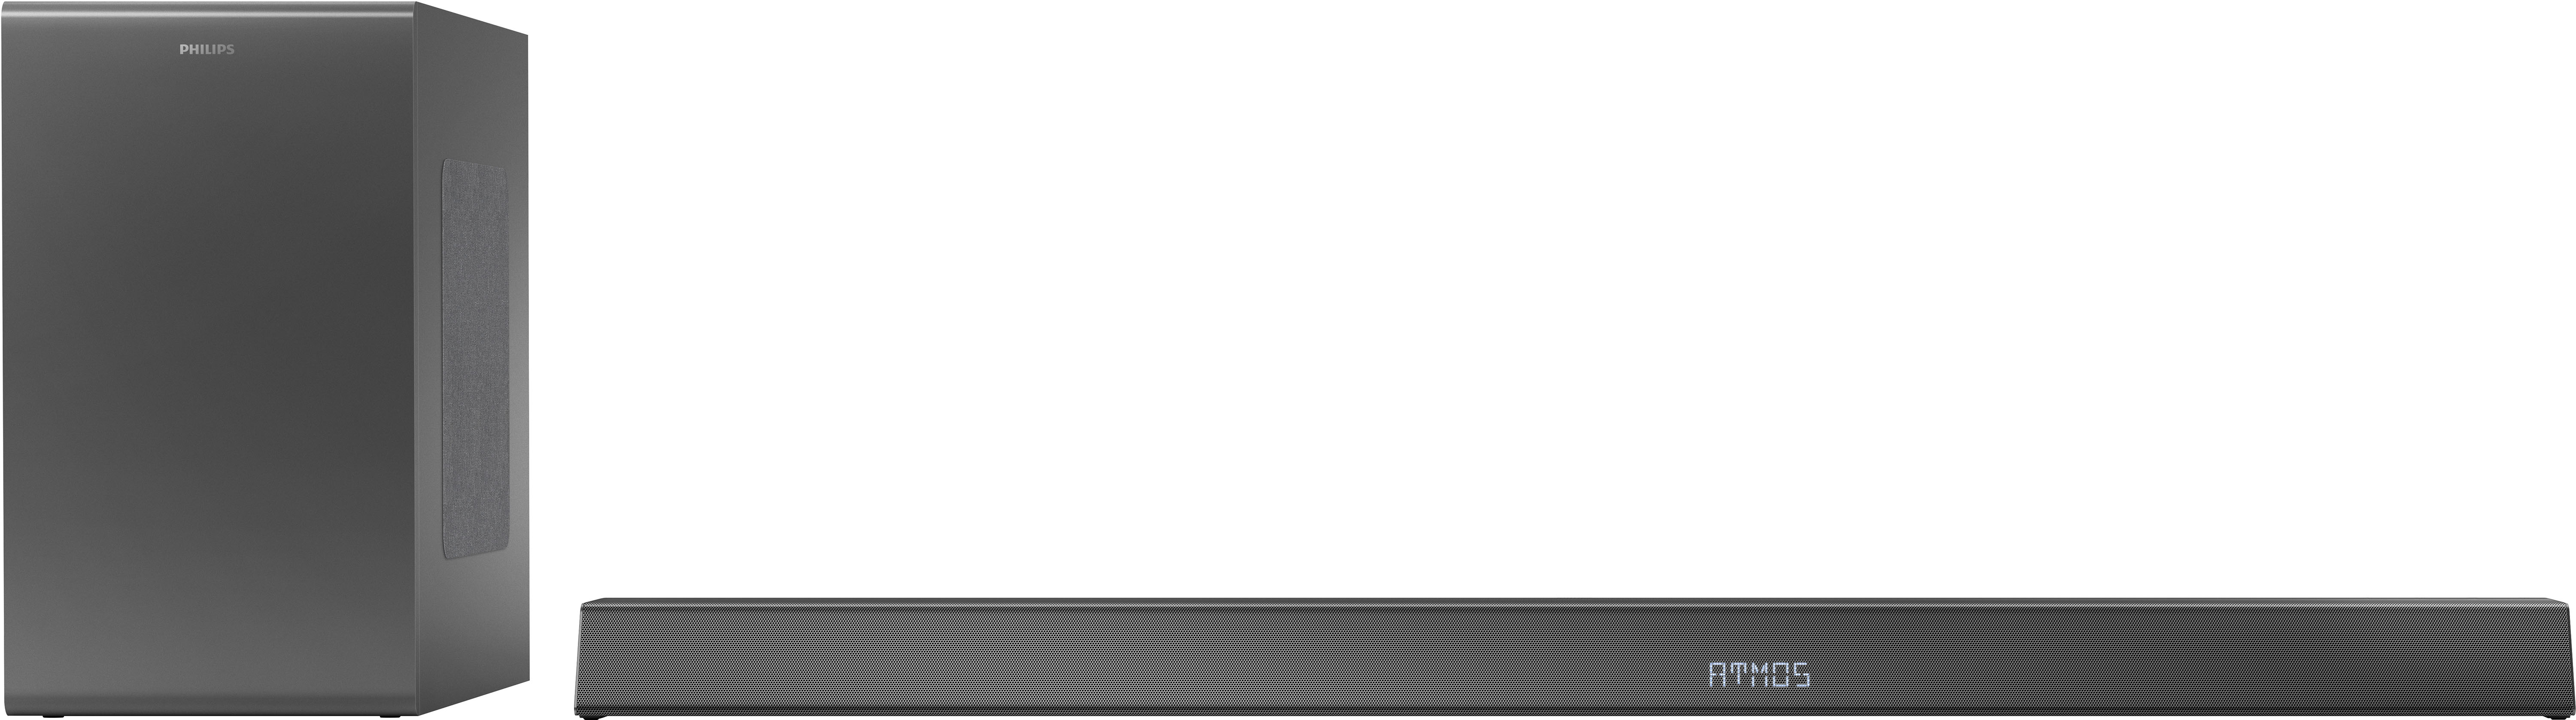 PHILIPS B8405 Soundbar 2.1 with Wireless Subwoofer, Dolby Atmos, Stadium EQ  Mode, DTS Play-Fi Compatible, Connects with  Echo Devices and Voice